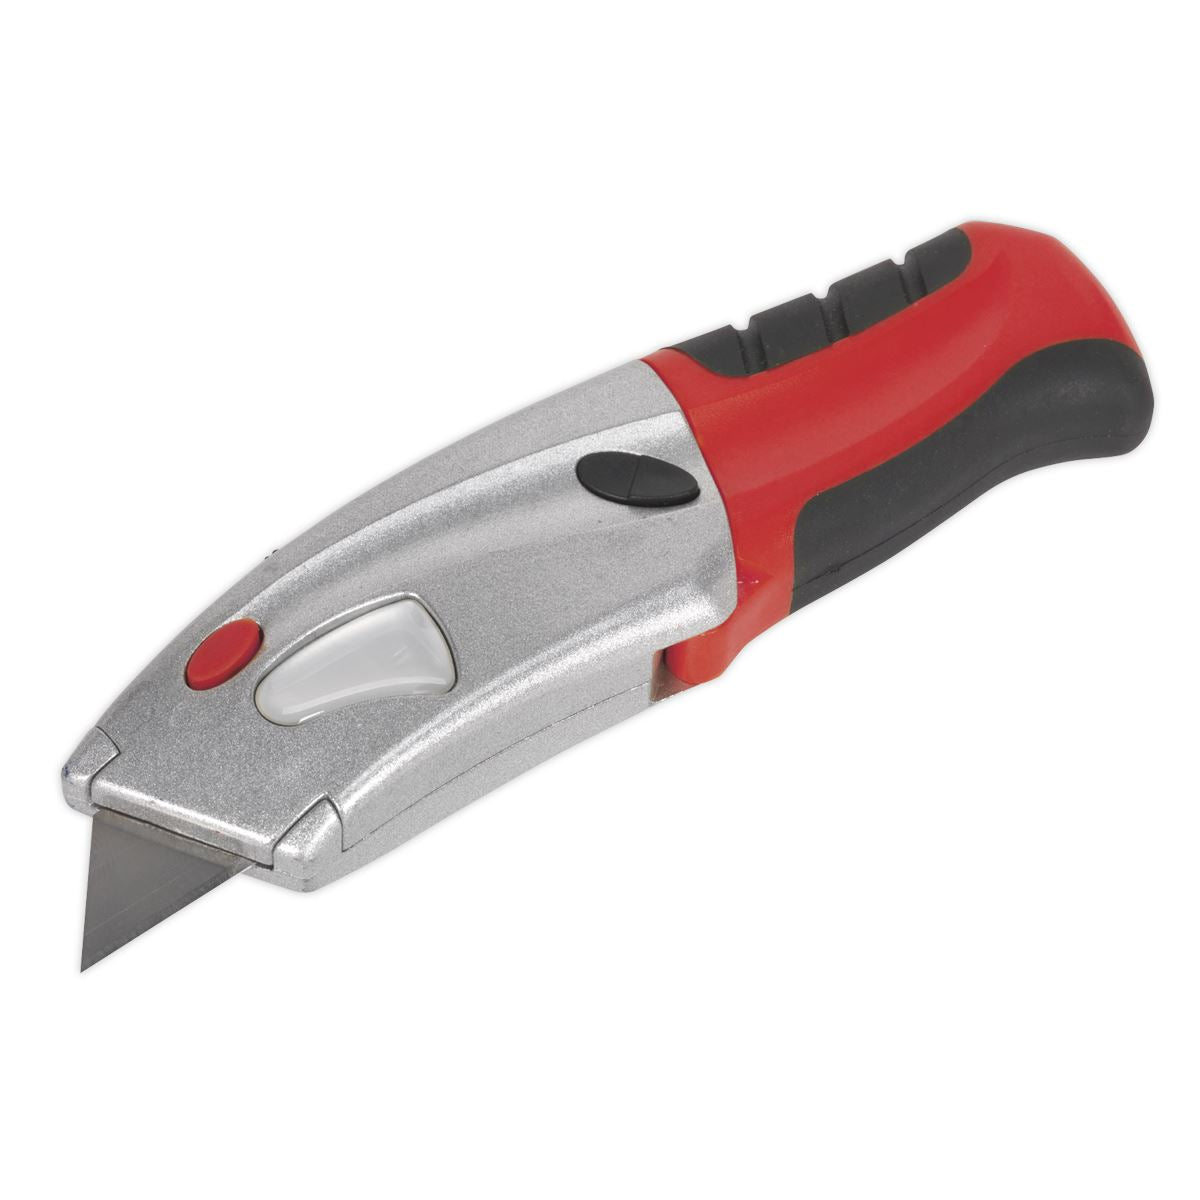 Sealey Premier Retractable Utility Knife Quick Change Blade